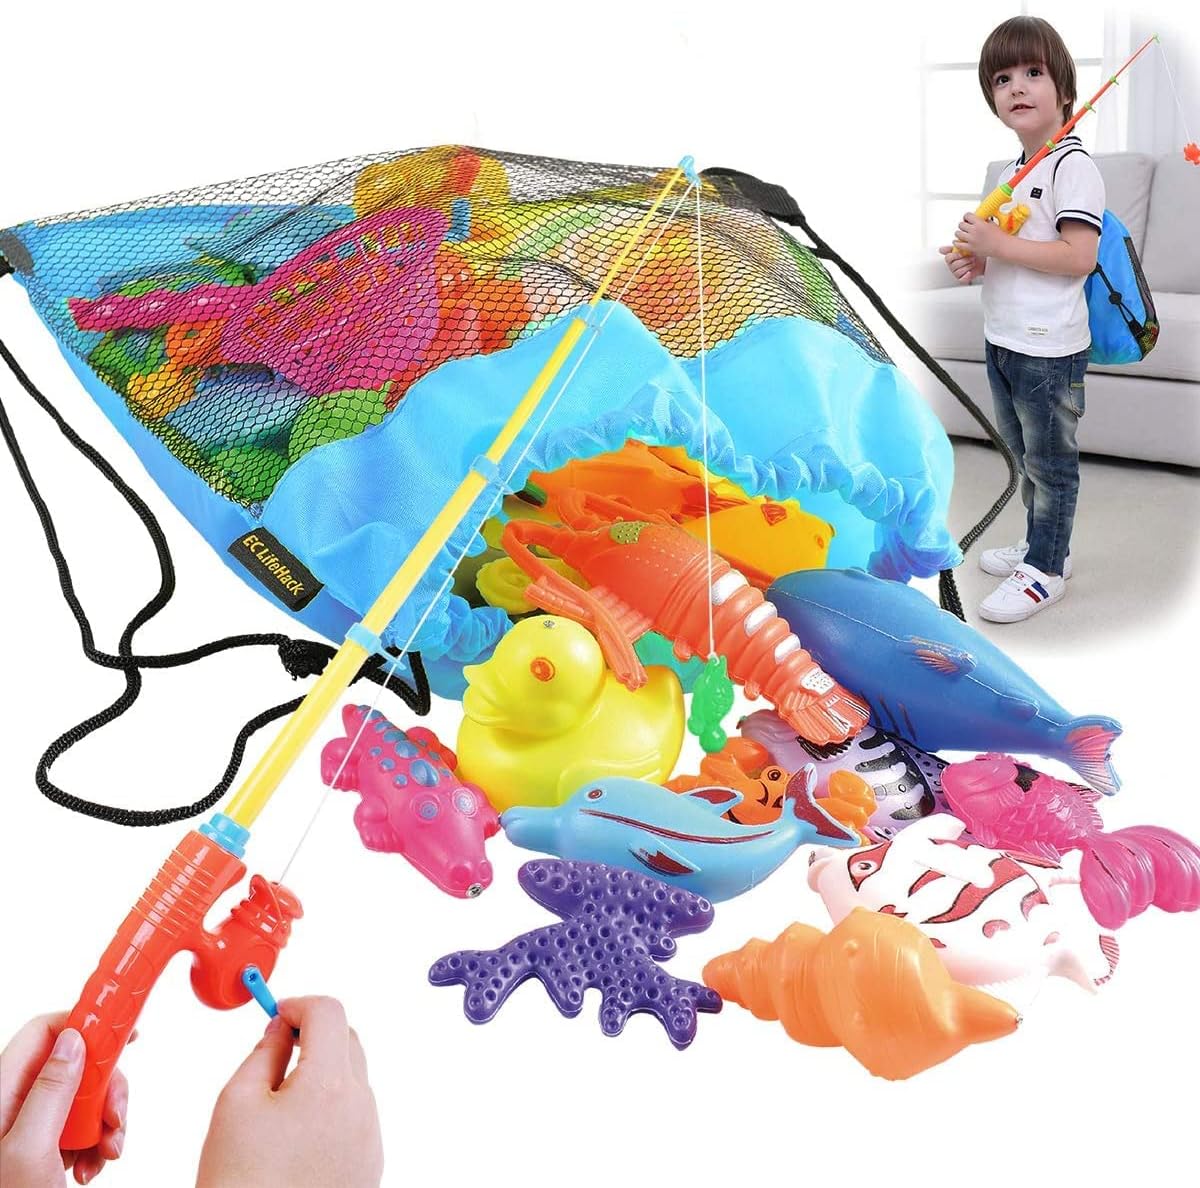 CozyBomB™ Magnetic Fishing Game for Kids | Bath Pool Toys Set for Water Table Learning Education Fishin for Bathtub Fun with Animal, Poles Rod Net Fishes for Kids Age 3 4 5 6 Year